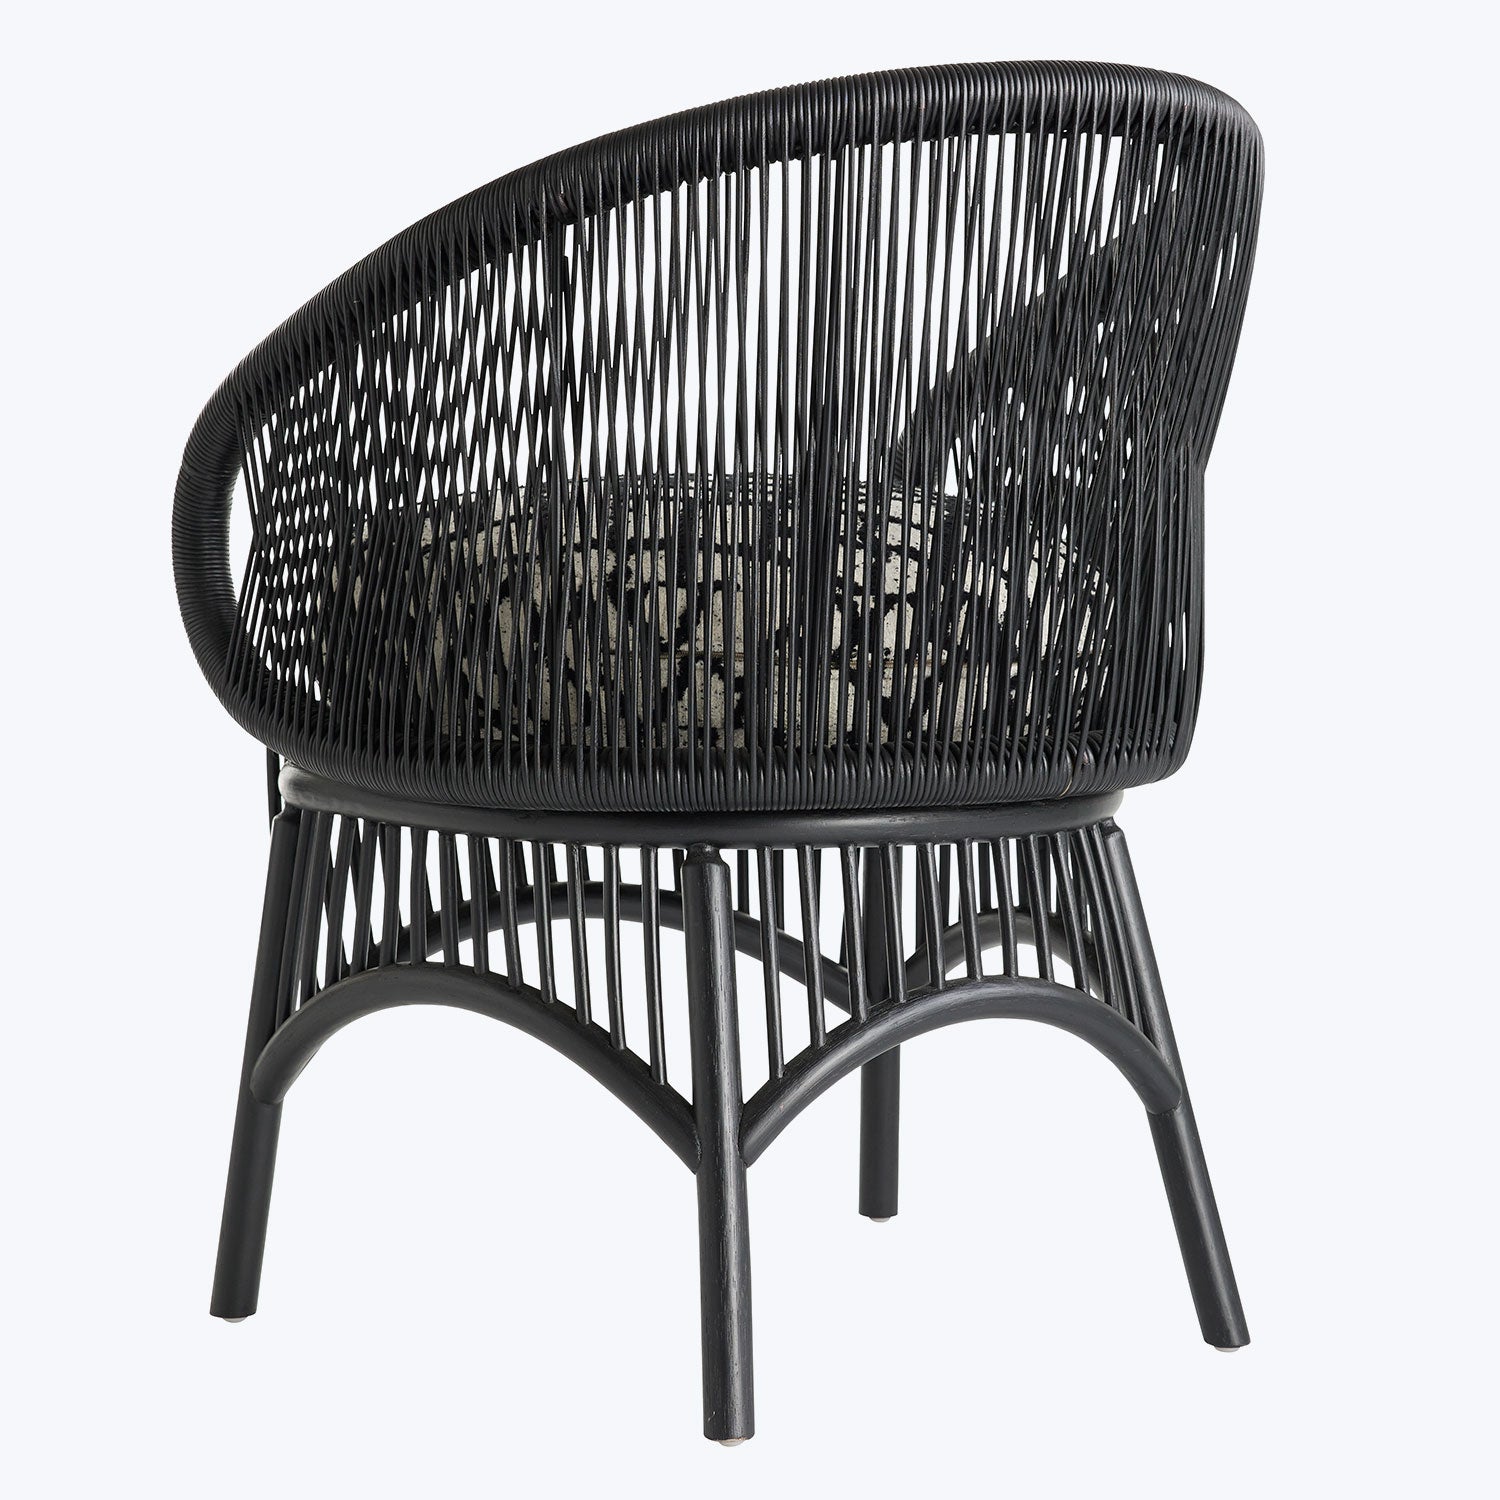 Modern black wicker chair with sleek design and airy weave